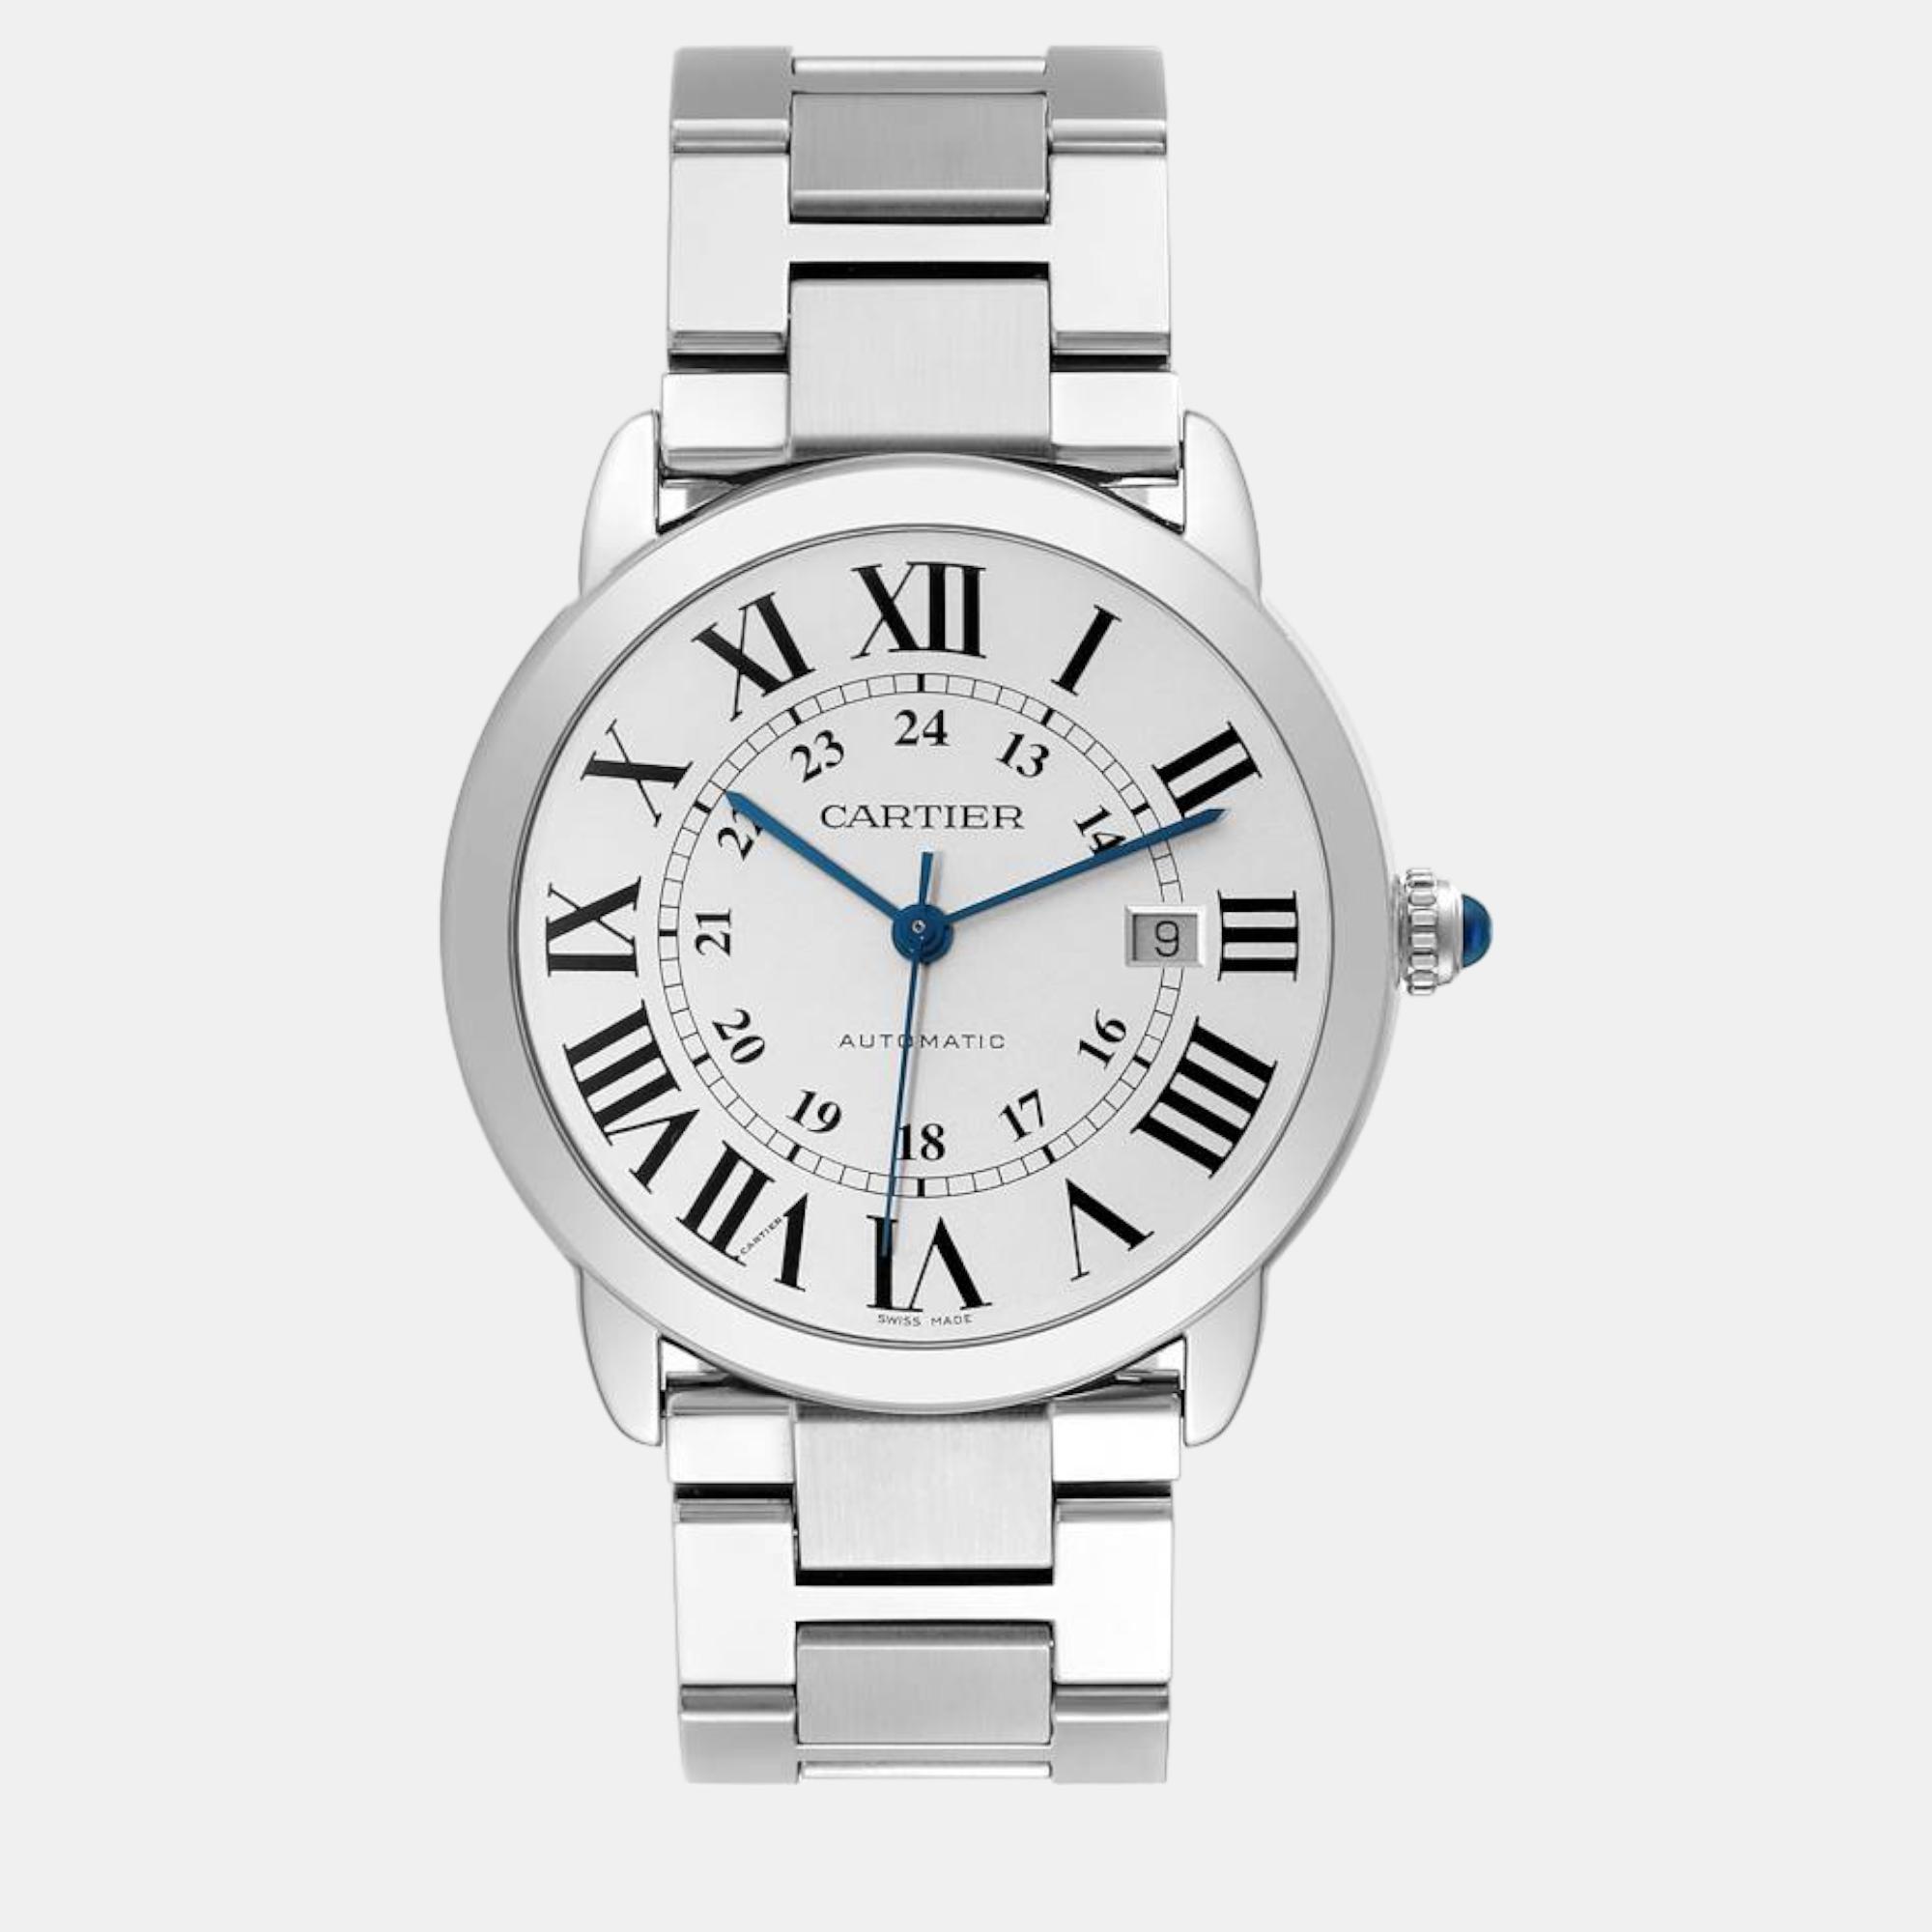 Cartier ronde solo xl silver dial automatic steel men's watch 42 mm